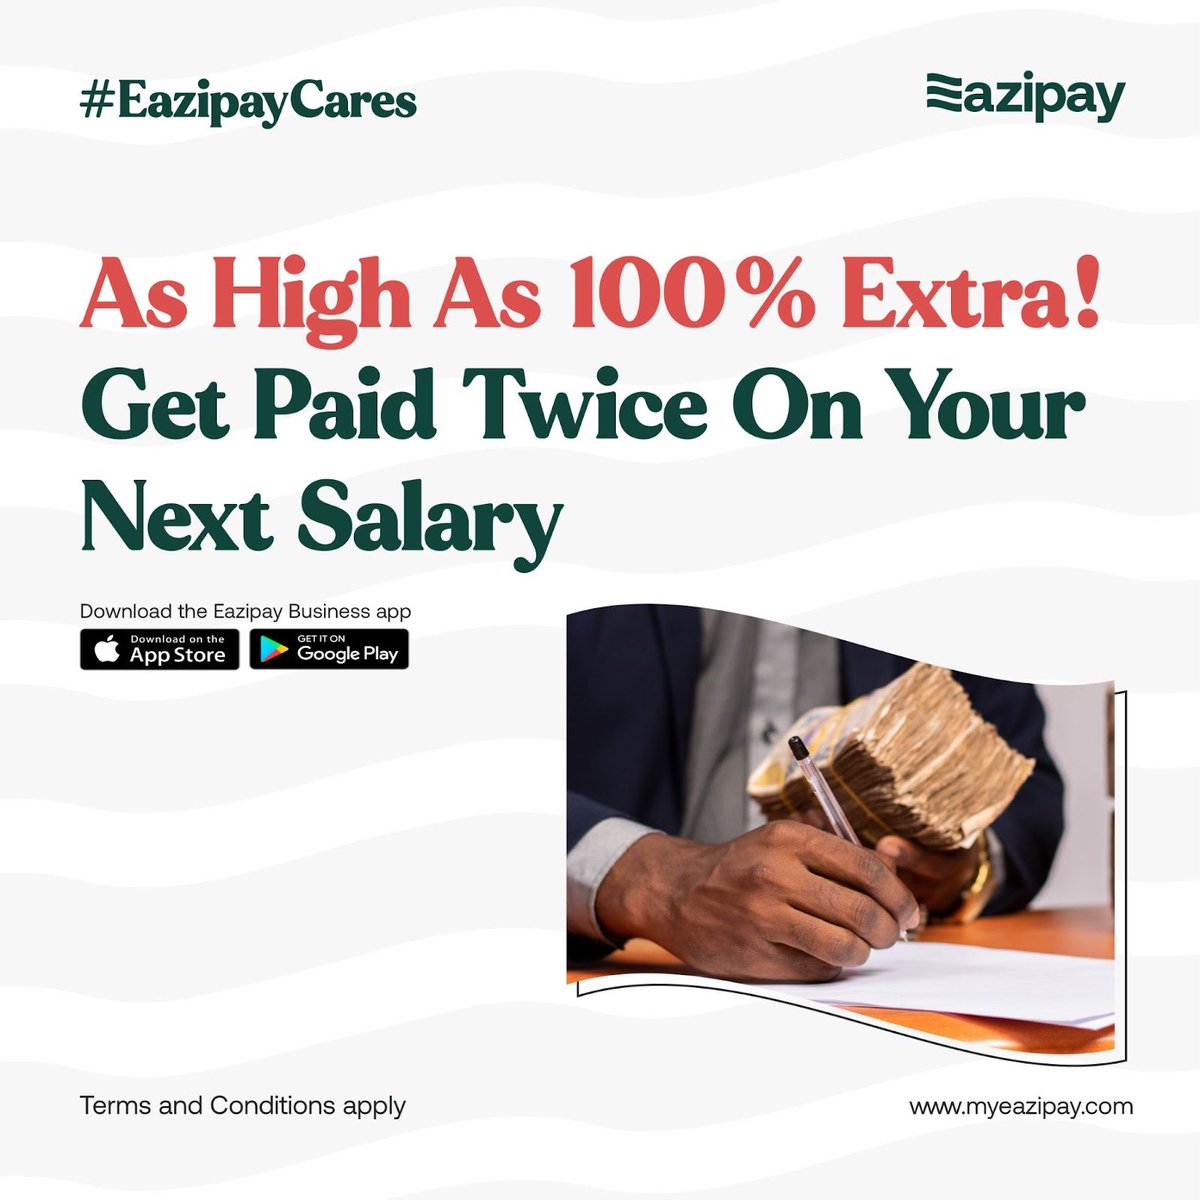 Your salary is about to get a major upgrade, and you shouldn’t miss out on the opportunity to earn extra this month! Visit myeazipay.com  to learn how to access up to 100% Extra on your salary.

#EazipayCares #WorkersDay #PayrollMadeEasy #BusinessSupport